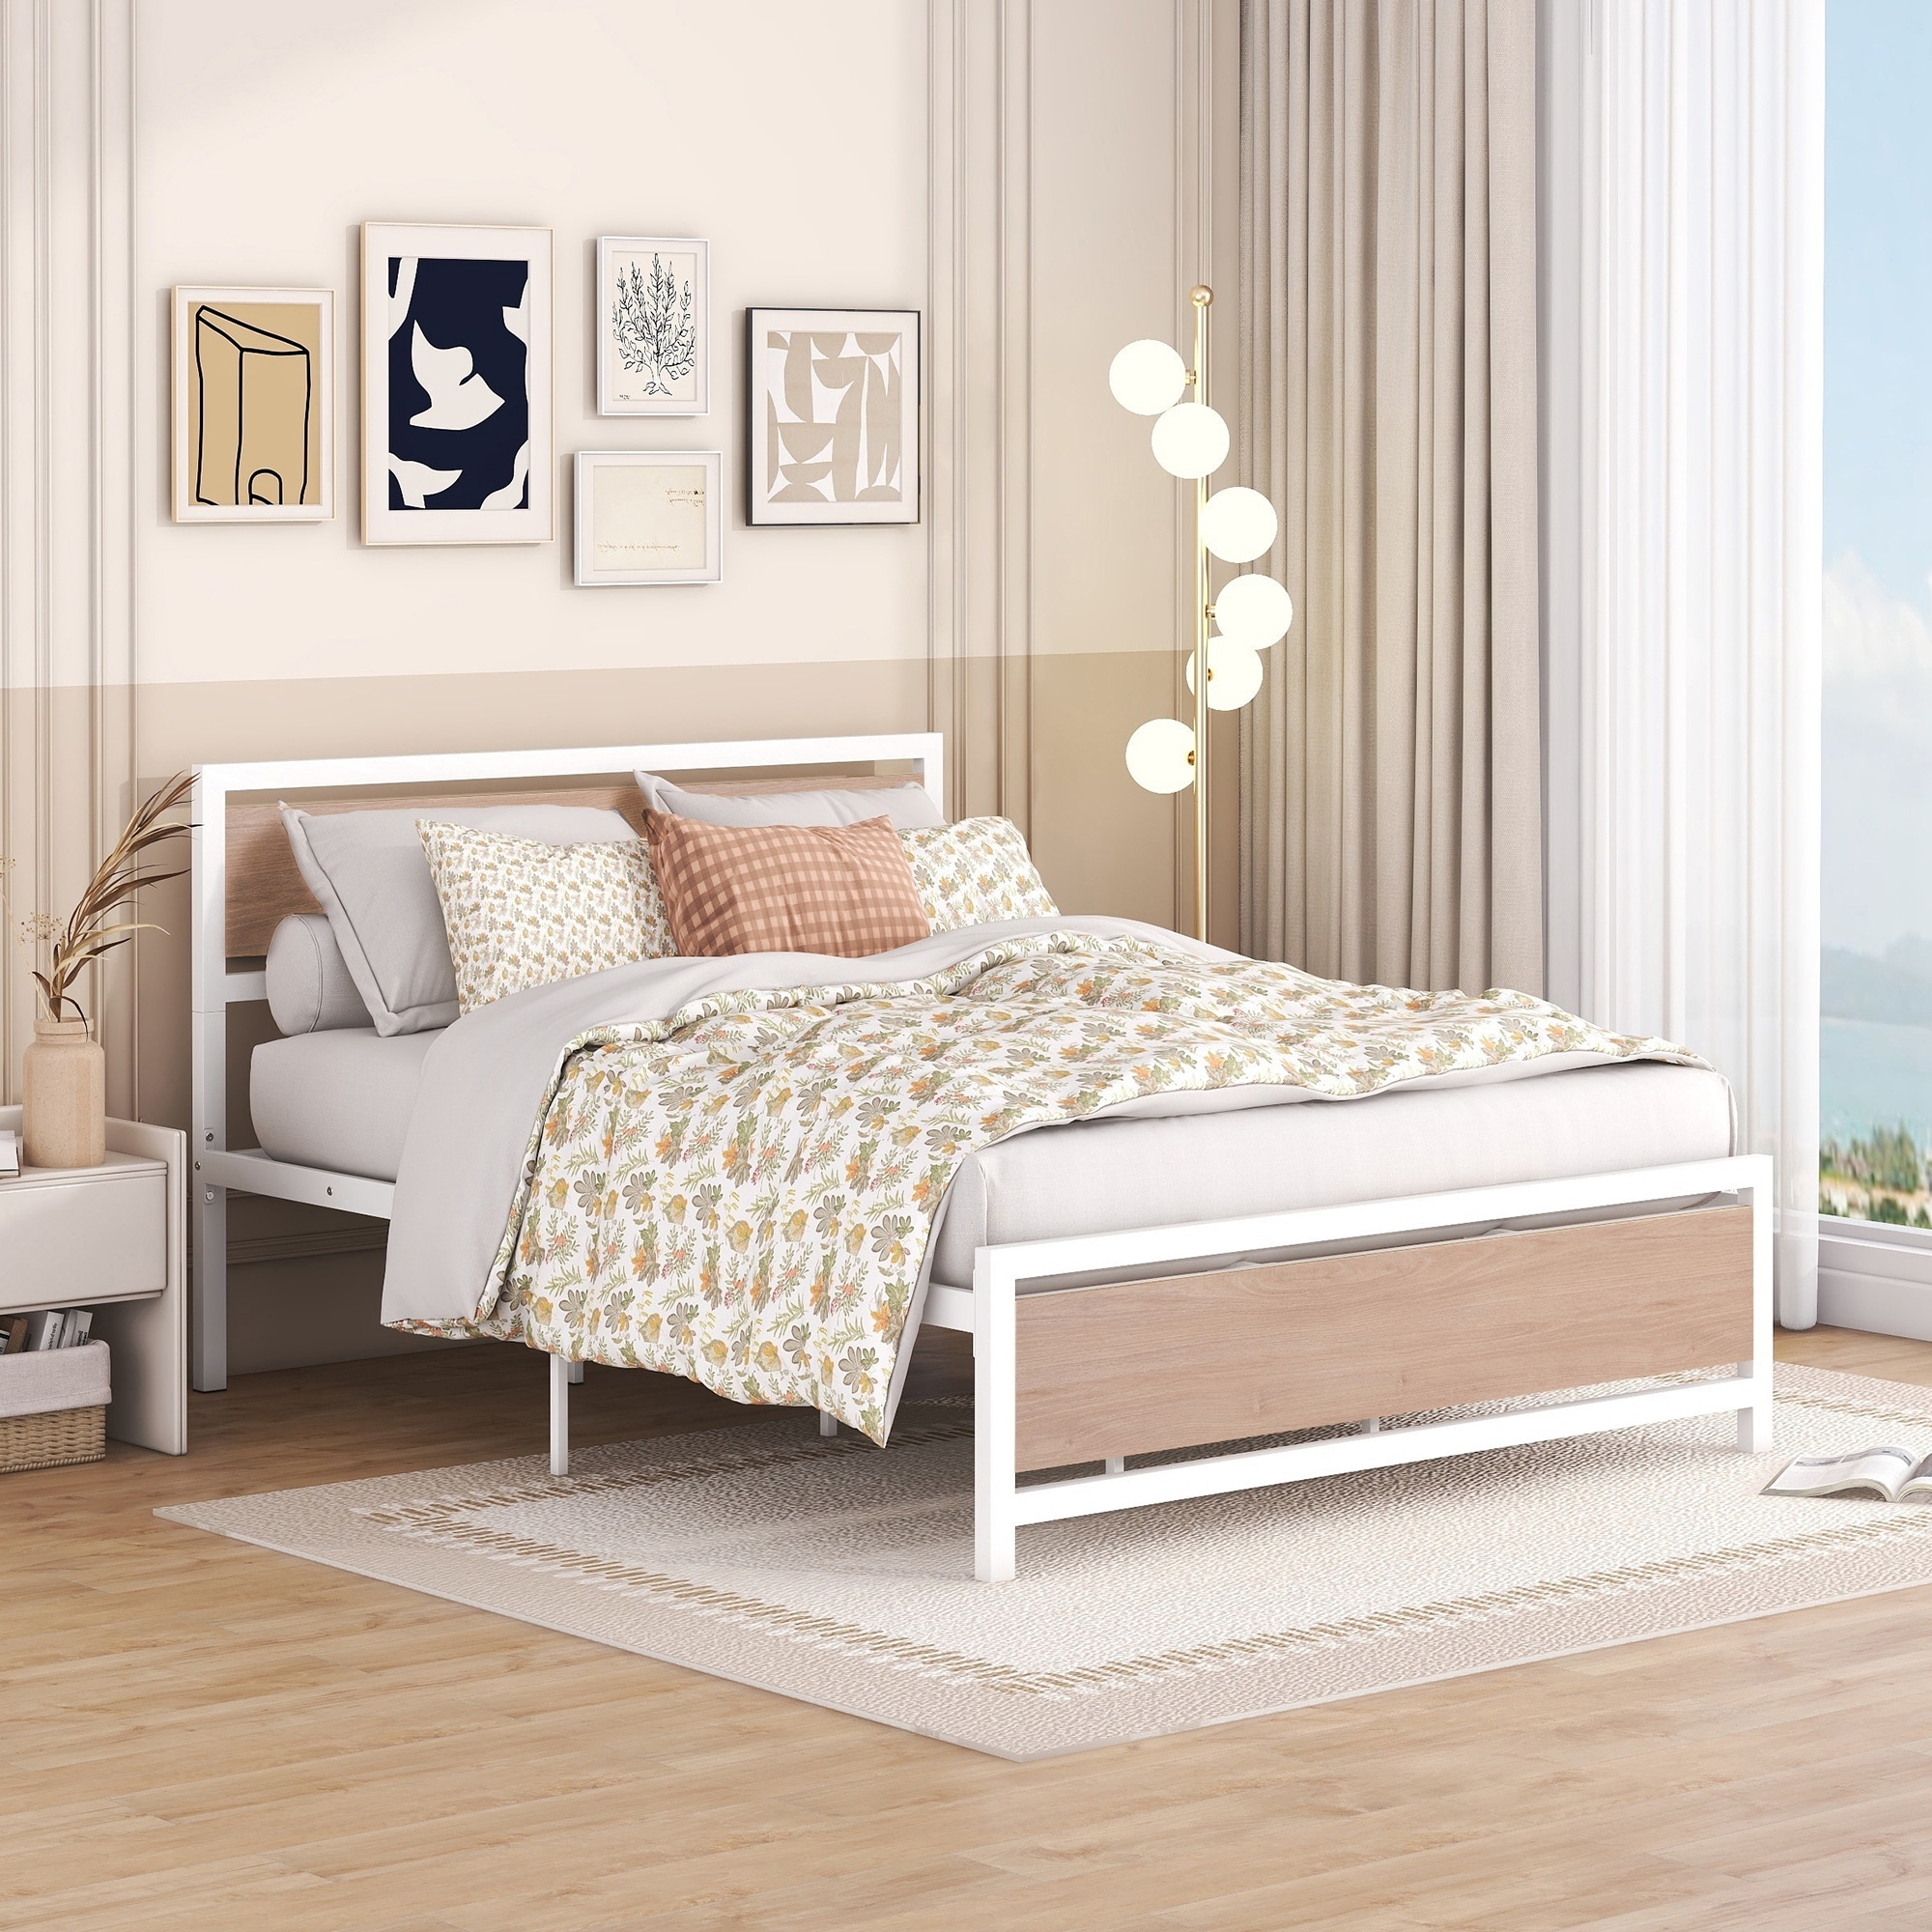 Metal Queen Size Platform Bed With Headboard And Footboard